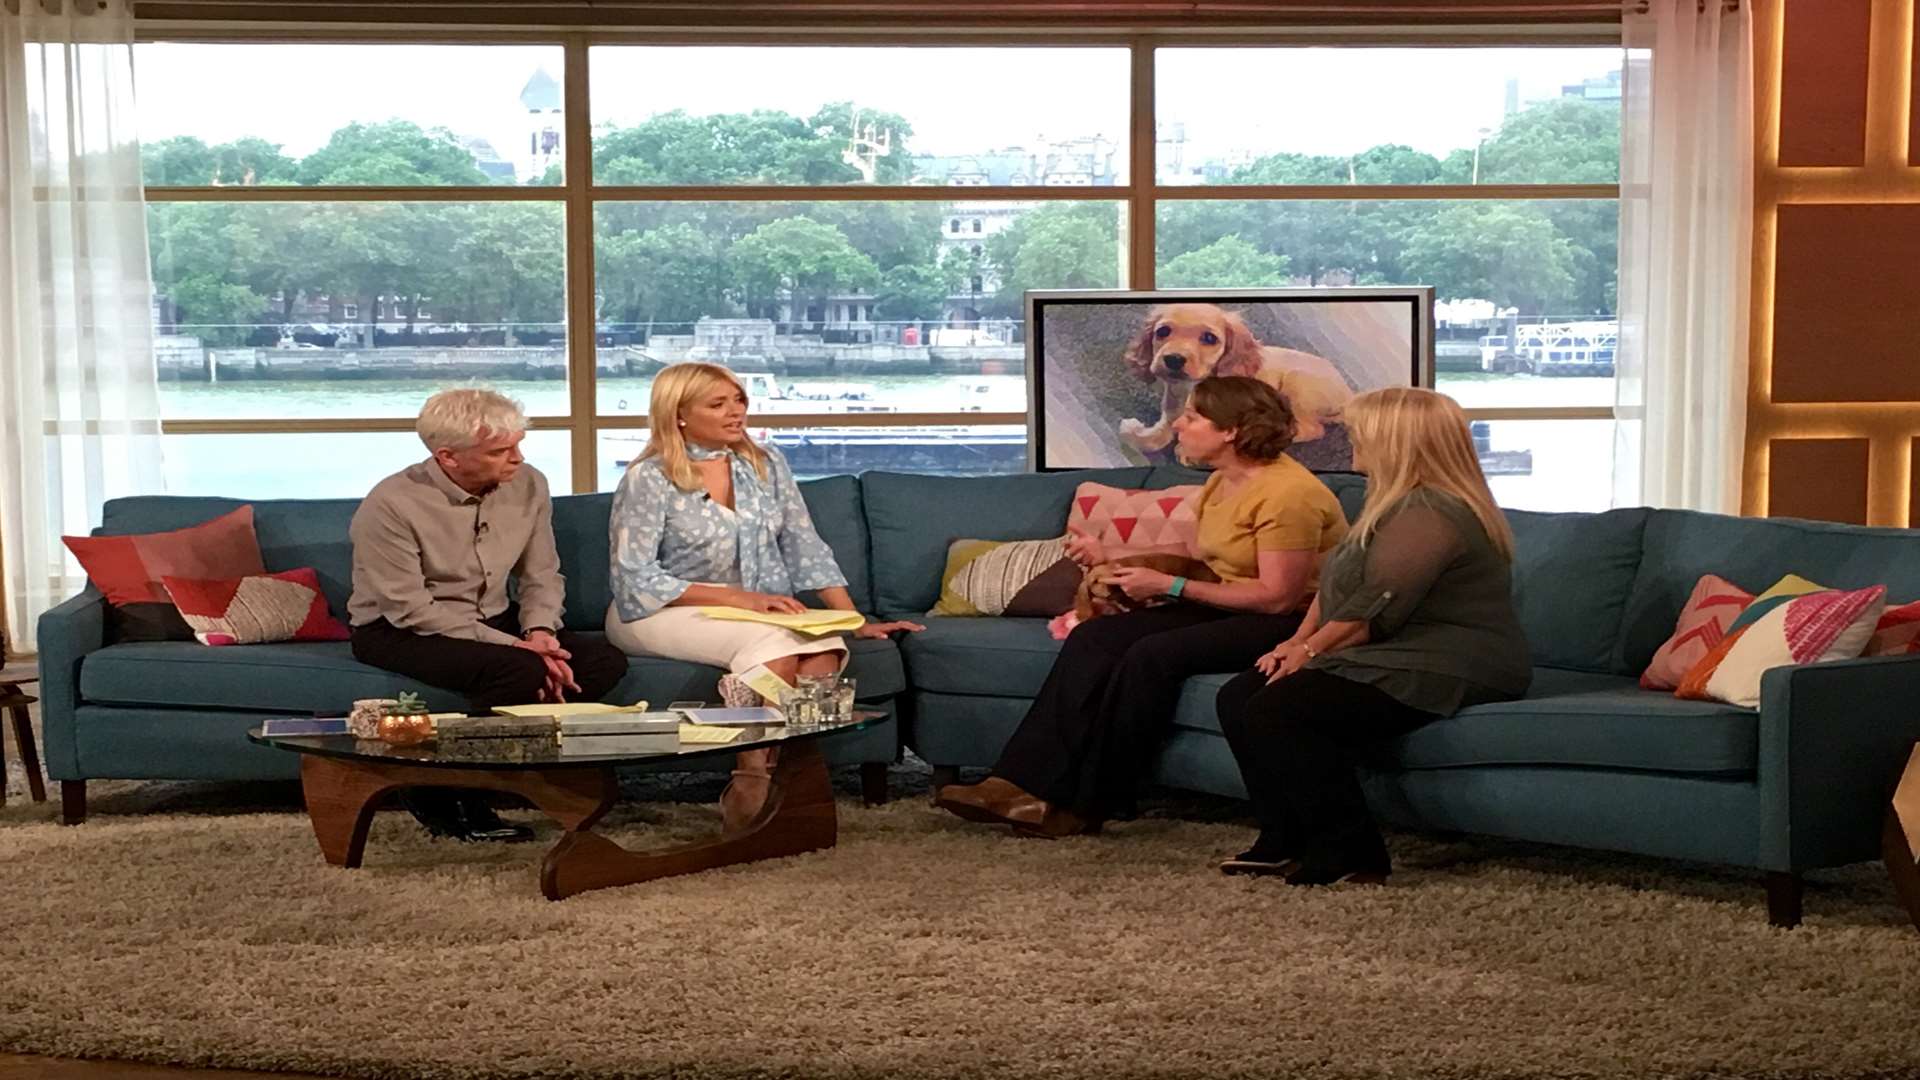 Eileen Mellis, Kerri Eilertsen and Wanda on the famous sofa with Philip Schofield and Holly Willoughby